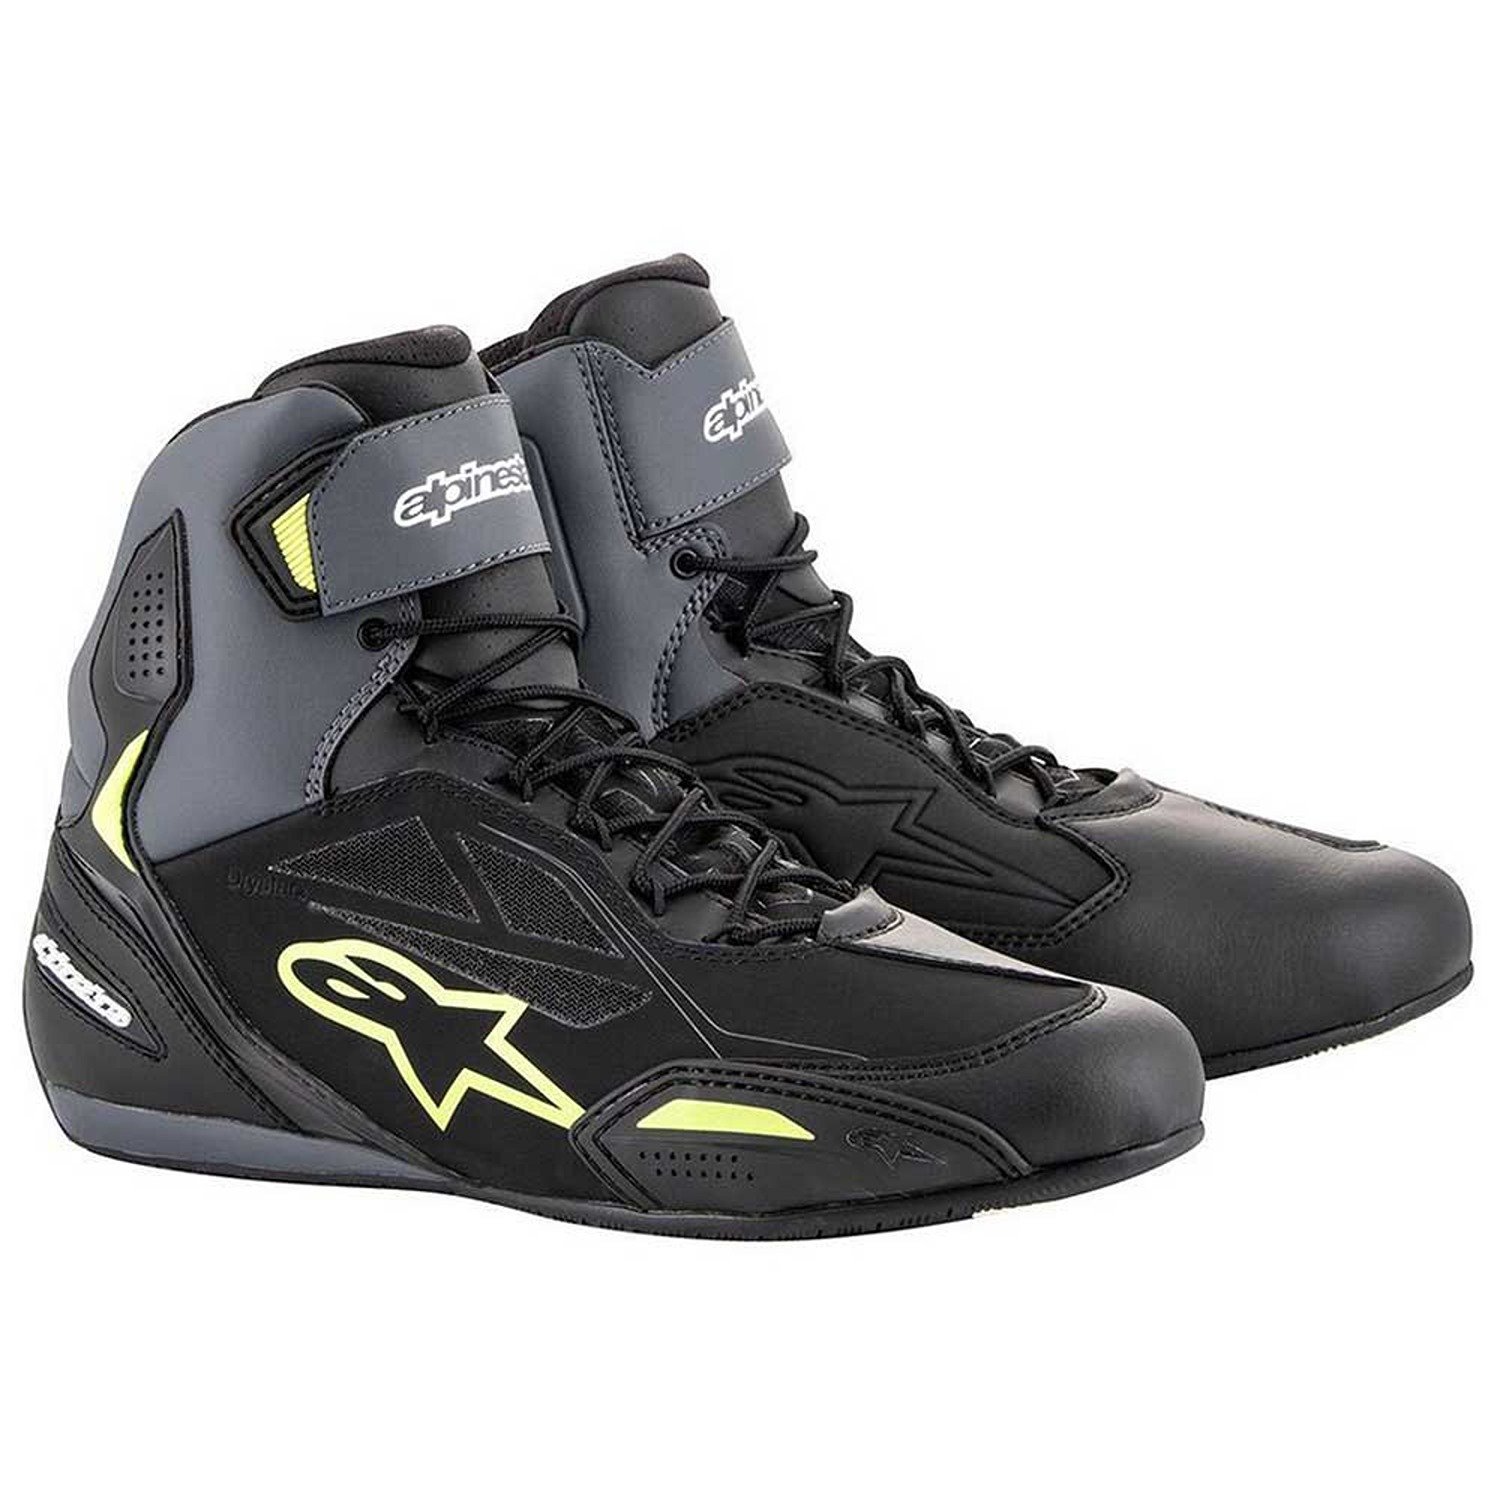 Image of Alpinestars Faster-3 Shoes Black Yellow Fluo Size US 125 ID 8059347331157